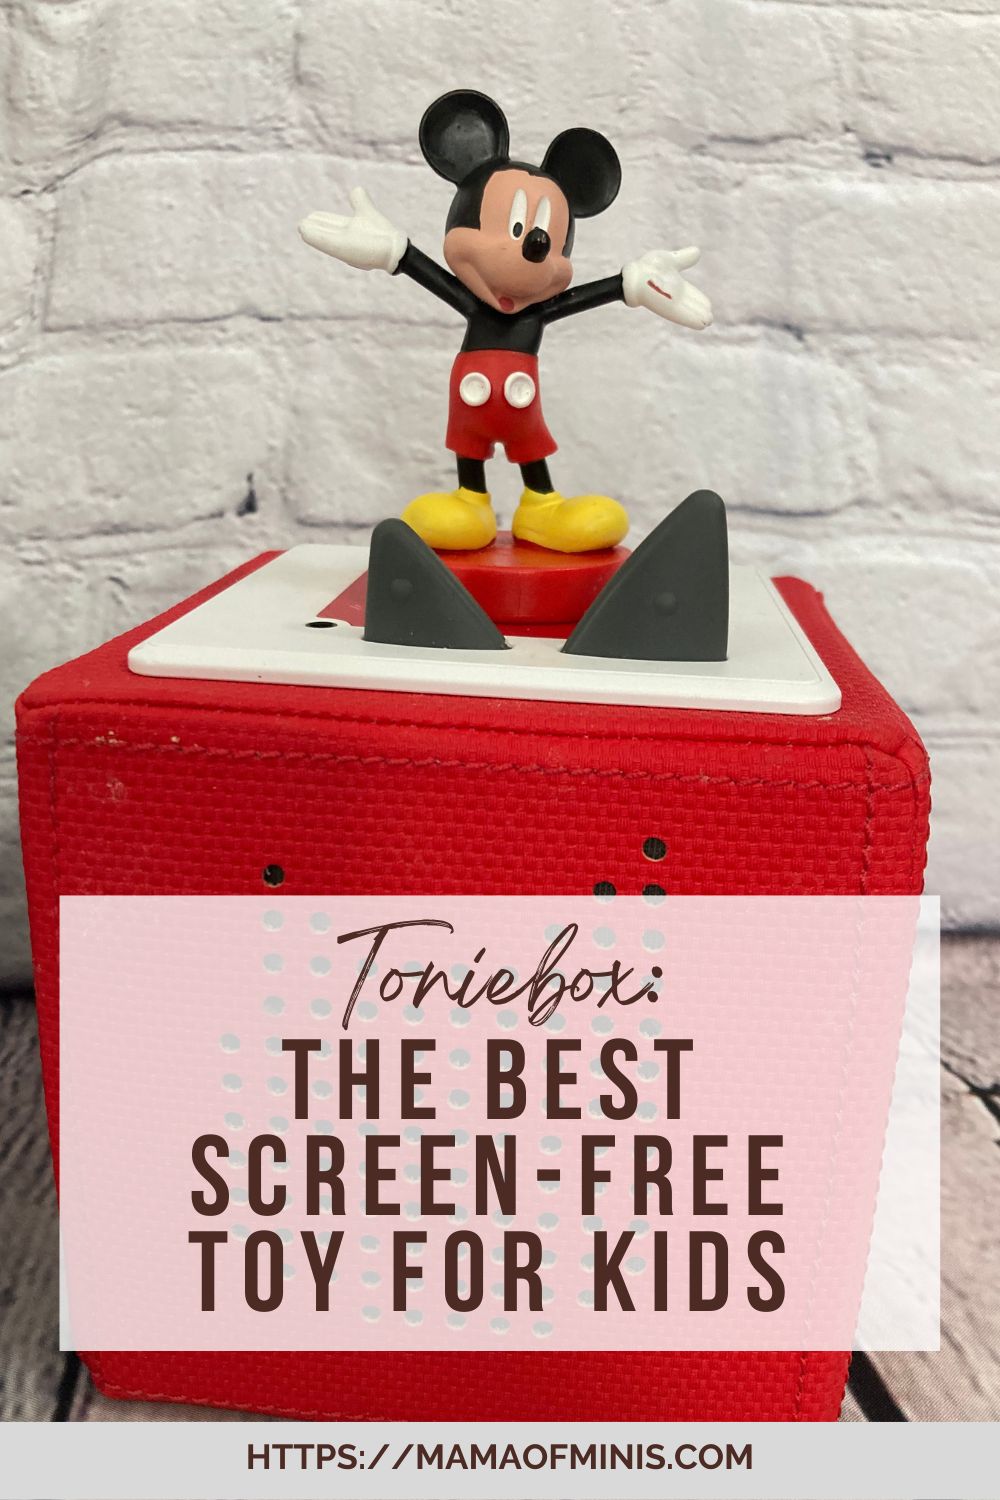 Toniebox: The Best Screen Free Toy for Kids